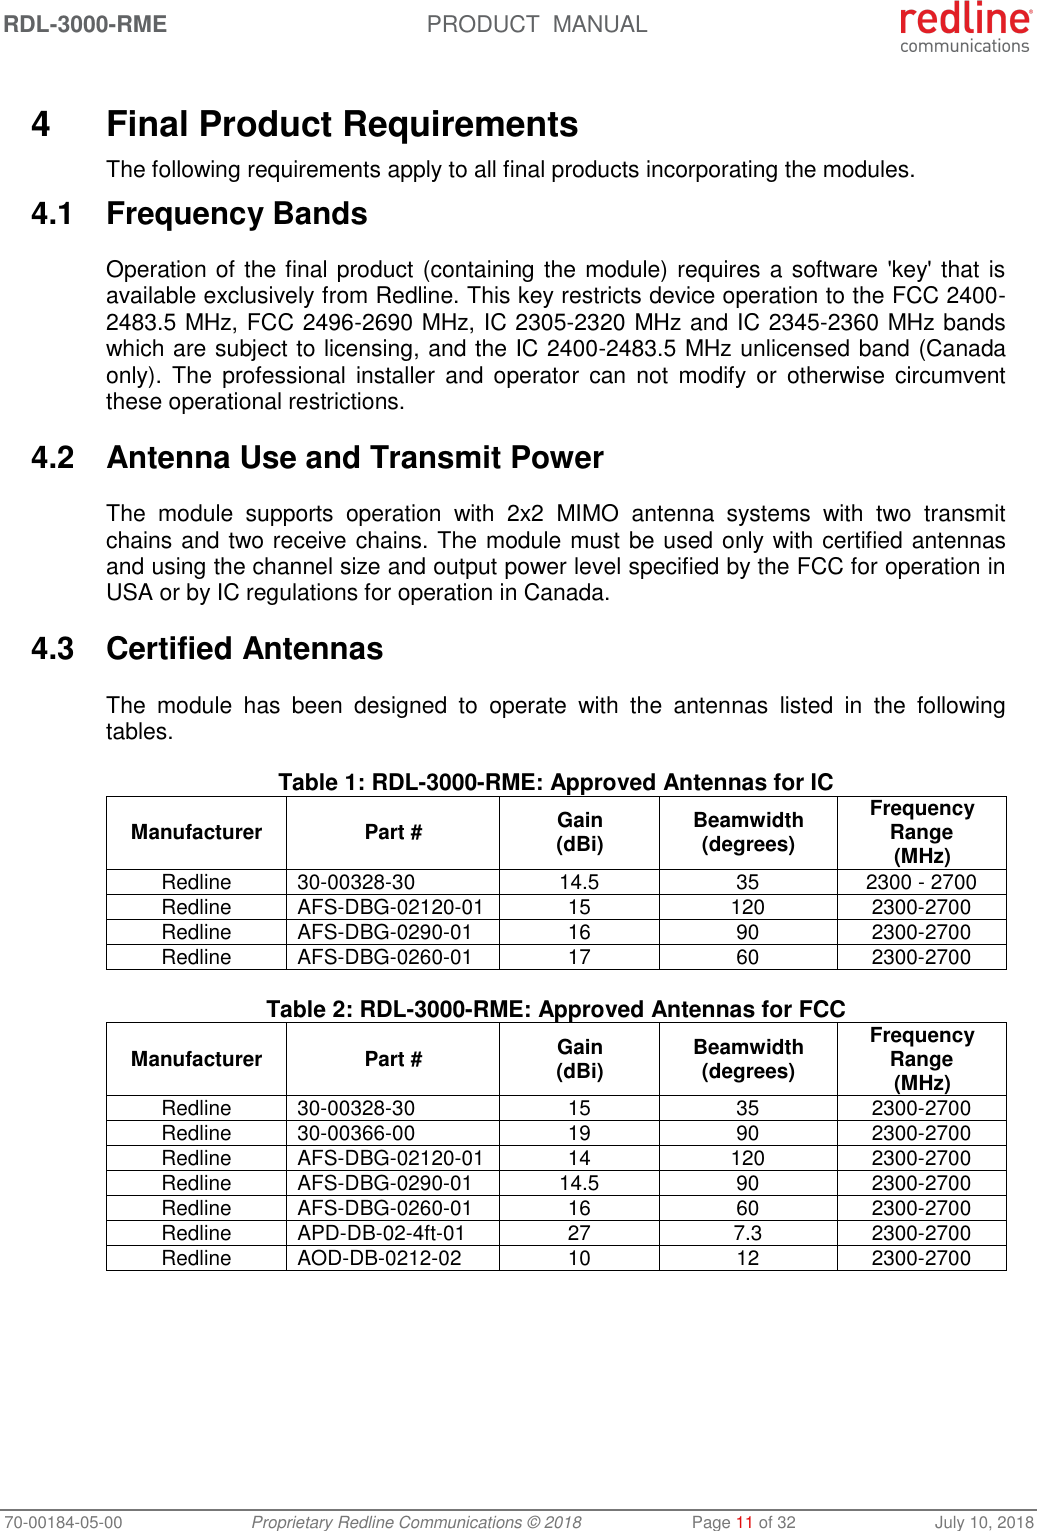 RDL-3000-RME  PRODUCT  MANUAL 70-00184-05-00 Proprietary Redline Communications © 2018  Page 11 of 32  July 10, 2018  4  Final Product Requirements The following requirements apply to all final products incorporating the modules. 4.1  Frequency Bands Operation of the final product (containing the module) requires a software &apos;key&apos; that is available exclusively from Redline. This key restricts device operation to the FCC 2400-2483.5 MHz, FCC 2496-2690 MHz, IC 2305-2320 MHz and IC 2345-2360 MHz bands which are subject to licensing, and the IC 2400-2483.5 MHz unlicensed band (Canada only).  The  professional  installer  and  operator  can not  modify  or  otherwise circumvent these operational restrictions. 4.2  Antenna Use and Transmit Power The  module  supports  operation  with  2x2  MIMO  antenna  systems  with  two  transmit chains and two receive chains. The module must be used only with certified antennas and using the channel size and output power level specified by the FCC for operation in USA or by IC regulations for operation in Canada. 4.3  Certified Antennas The  module  has  been  designed  to  operate  with  the  antennas  listed  in  the  following tables. Table 1: RDL-3000-RME: Approved Antennas for IC Manufacturer Part # Gain (dBi) Beamwidth (degrees) Frequency Range (MHz) Redline 30-00328-30 14.5 35 2300 - 2700 Redline AFS-DBG-02120-01 15 120 2300-2700 Redline AFS-DBG-0290-01 16 90 2300-2700 Redline AFS-DBG-0260-01 17 60 2300-2700  Table 2: RDL-3000-RME: Approved Antennas for FCC Manufacturer Part # Gain (dBi) Beamwidth (degrees) Frequency Range (MHz) Redline 30-00328-30 15 35 2300-2700 Redline 30-00366-00 19 90 2300-2700 Redline AFS-DBG-02120-01 14 120 2300-2700 Redline AFS-DBG-0290-01 14.5 90 2300-2700 Redline AFS-DBG-0260-01 16 60 2300-2700 Redline APD-DB-02-4ft-01 27 7.3 2300-2700 Redline AOD-DB-0212-02 10 12 2300-2700 